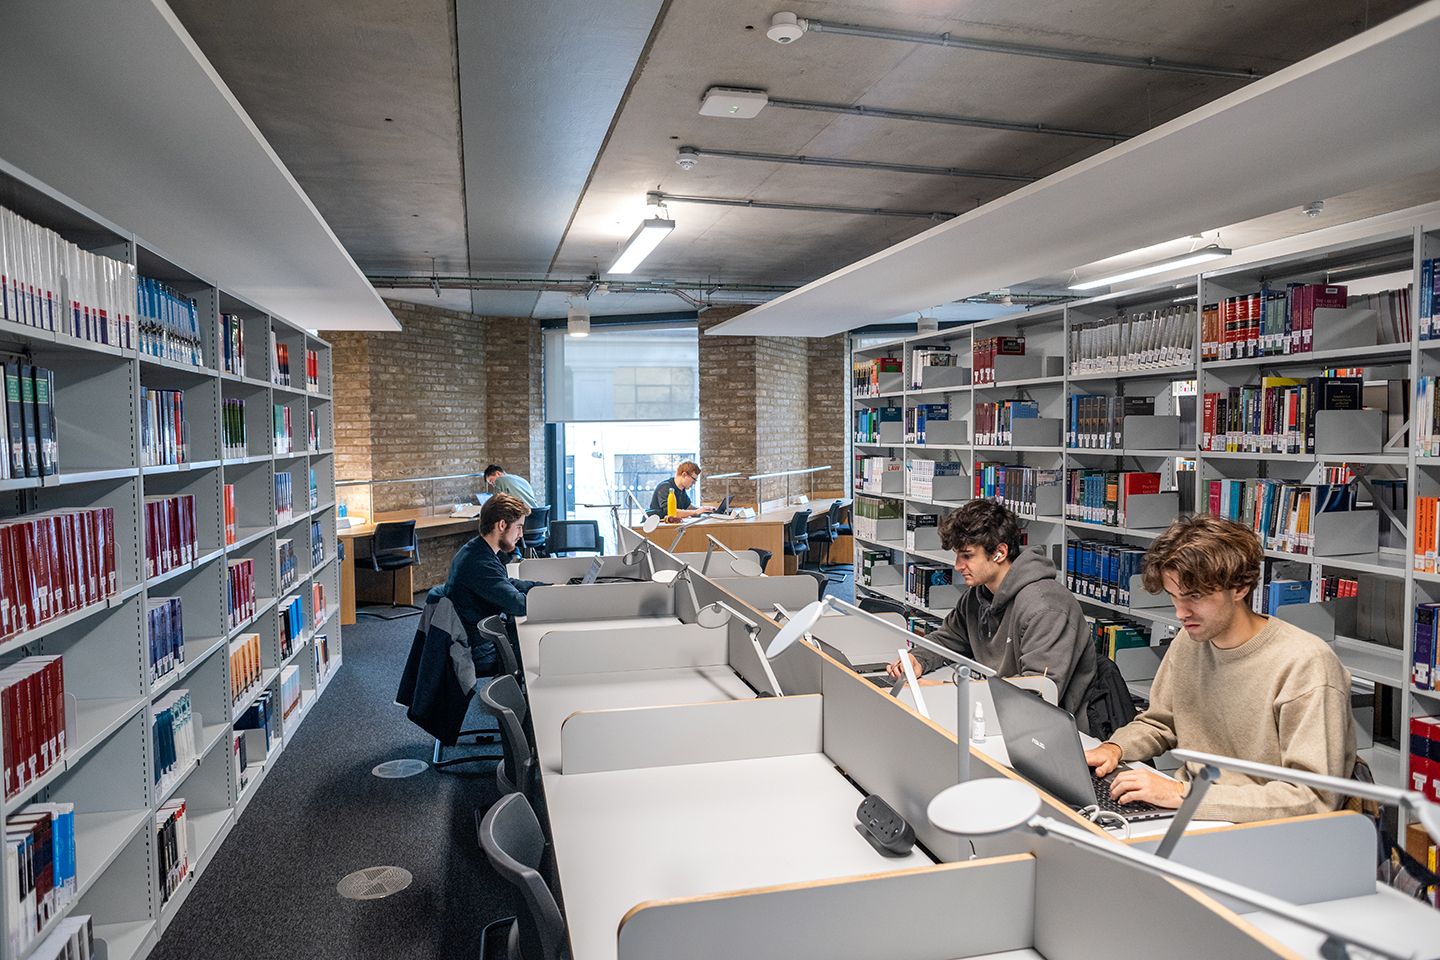 Law students on their laptops sat at individual study desks in a light and airy law library